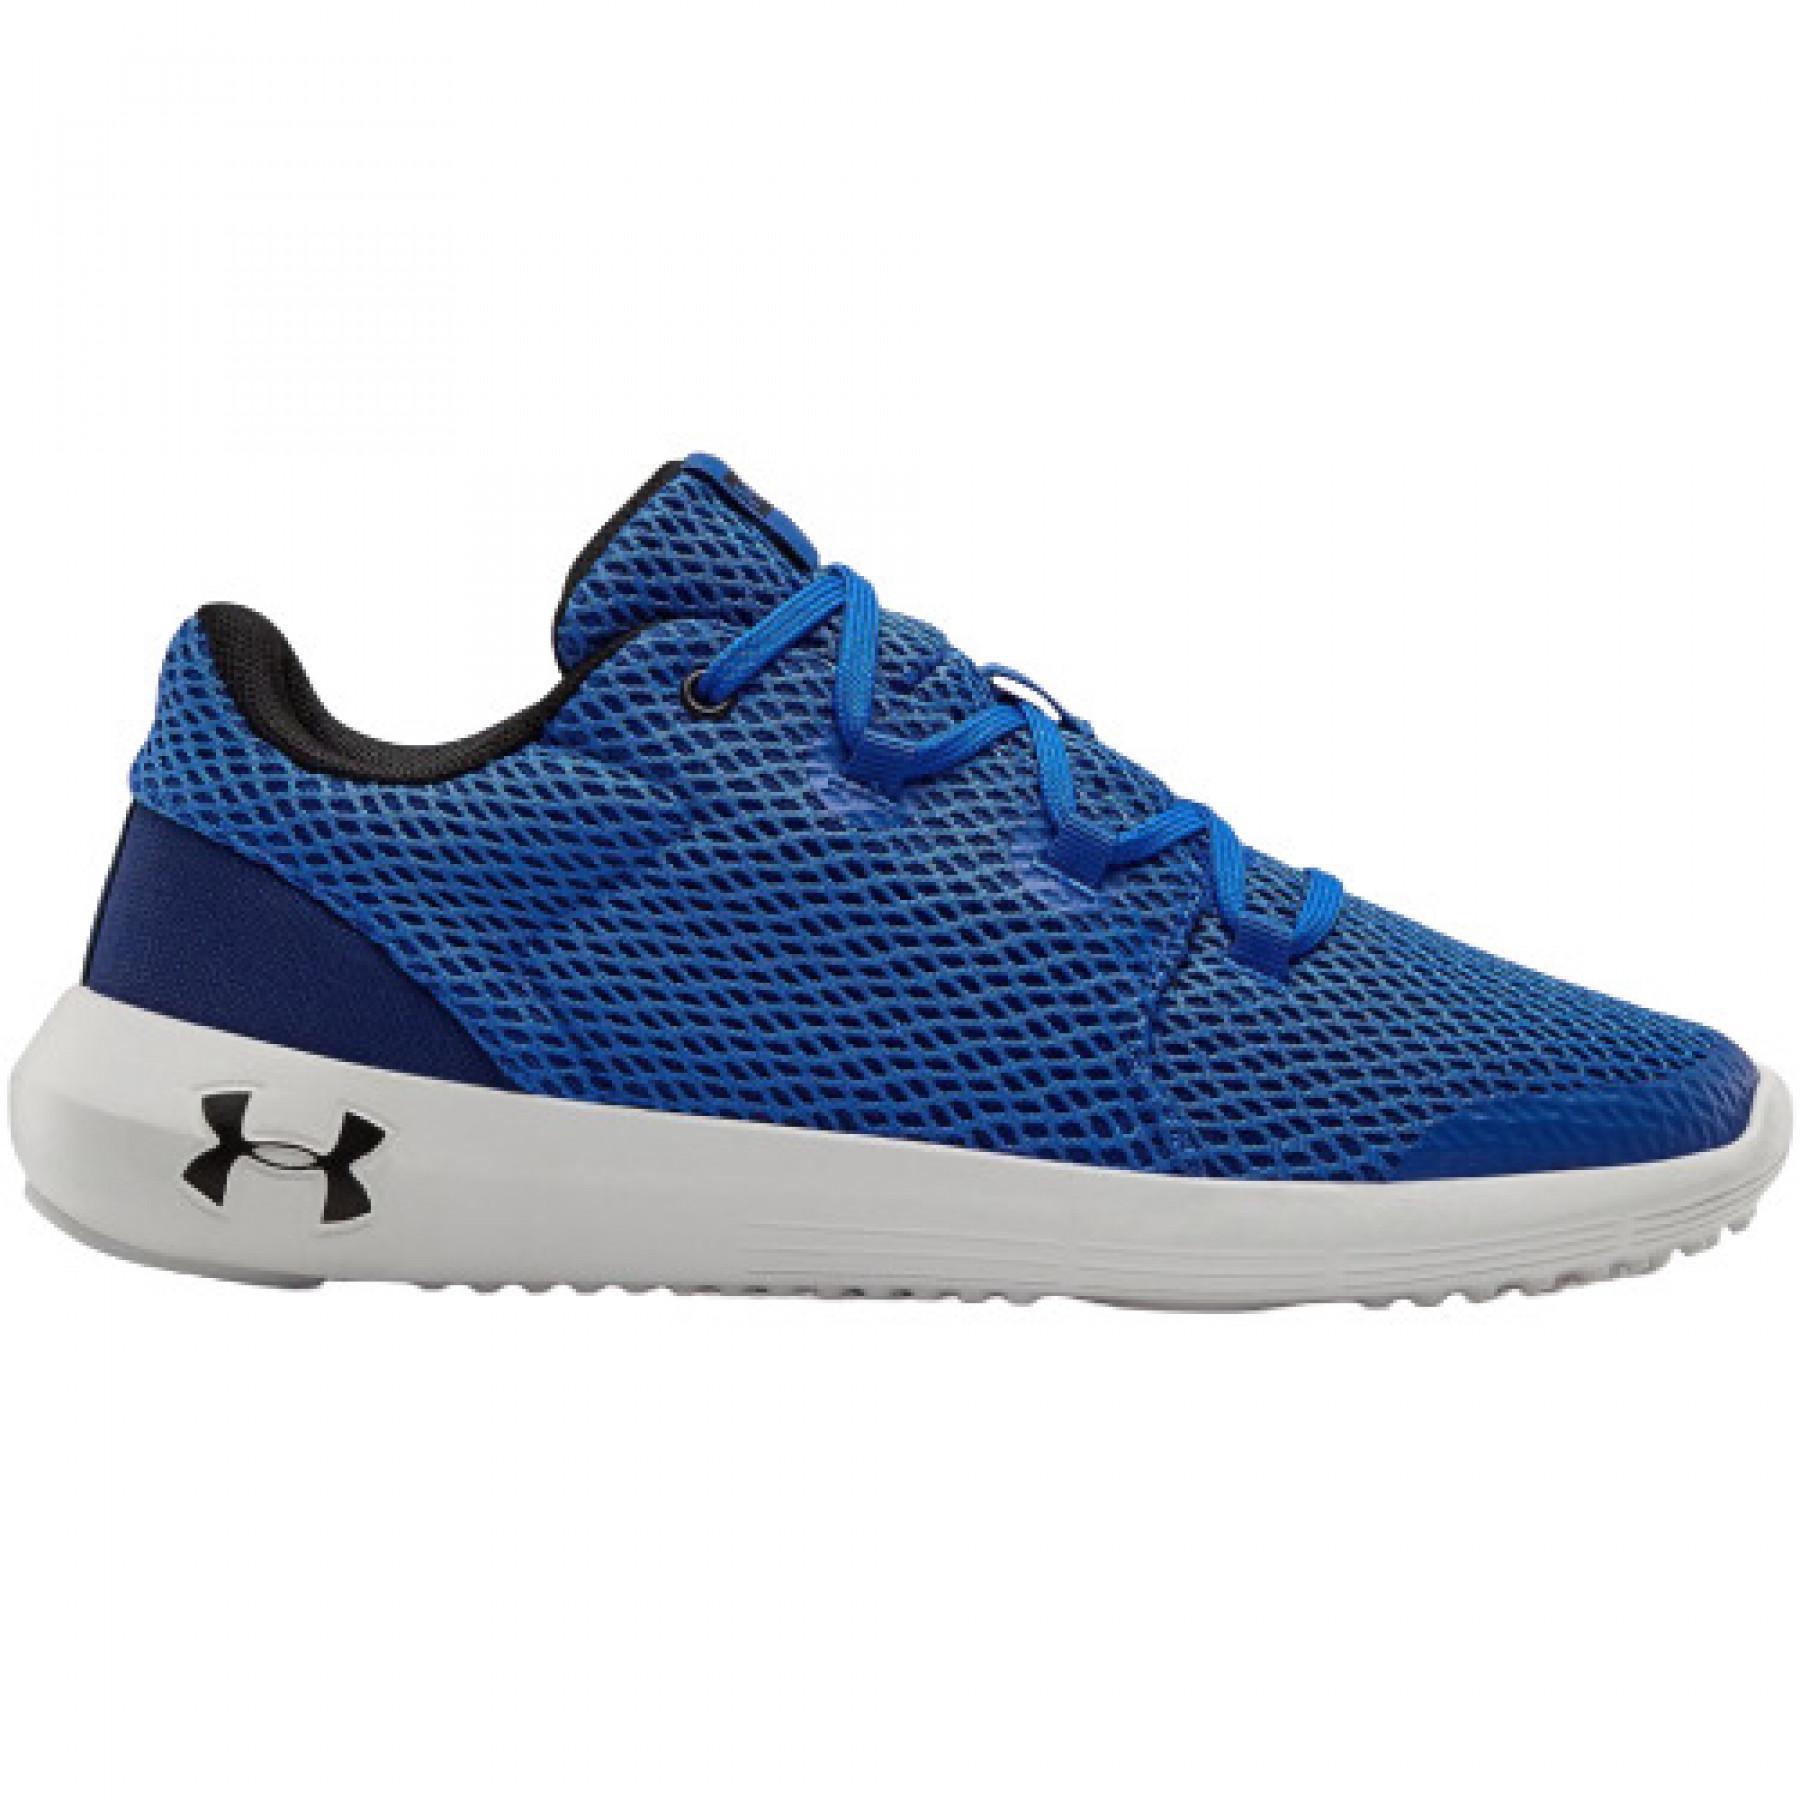 Children's sneakers Under Armour Ripple 2.0 NM Sportstyle